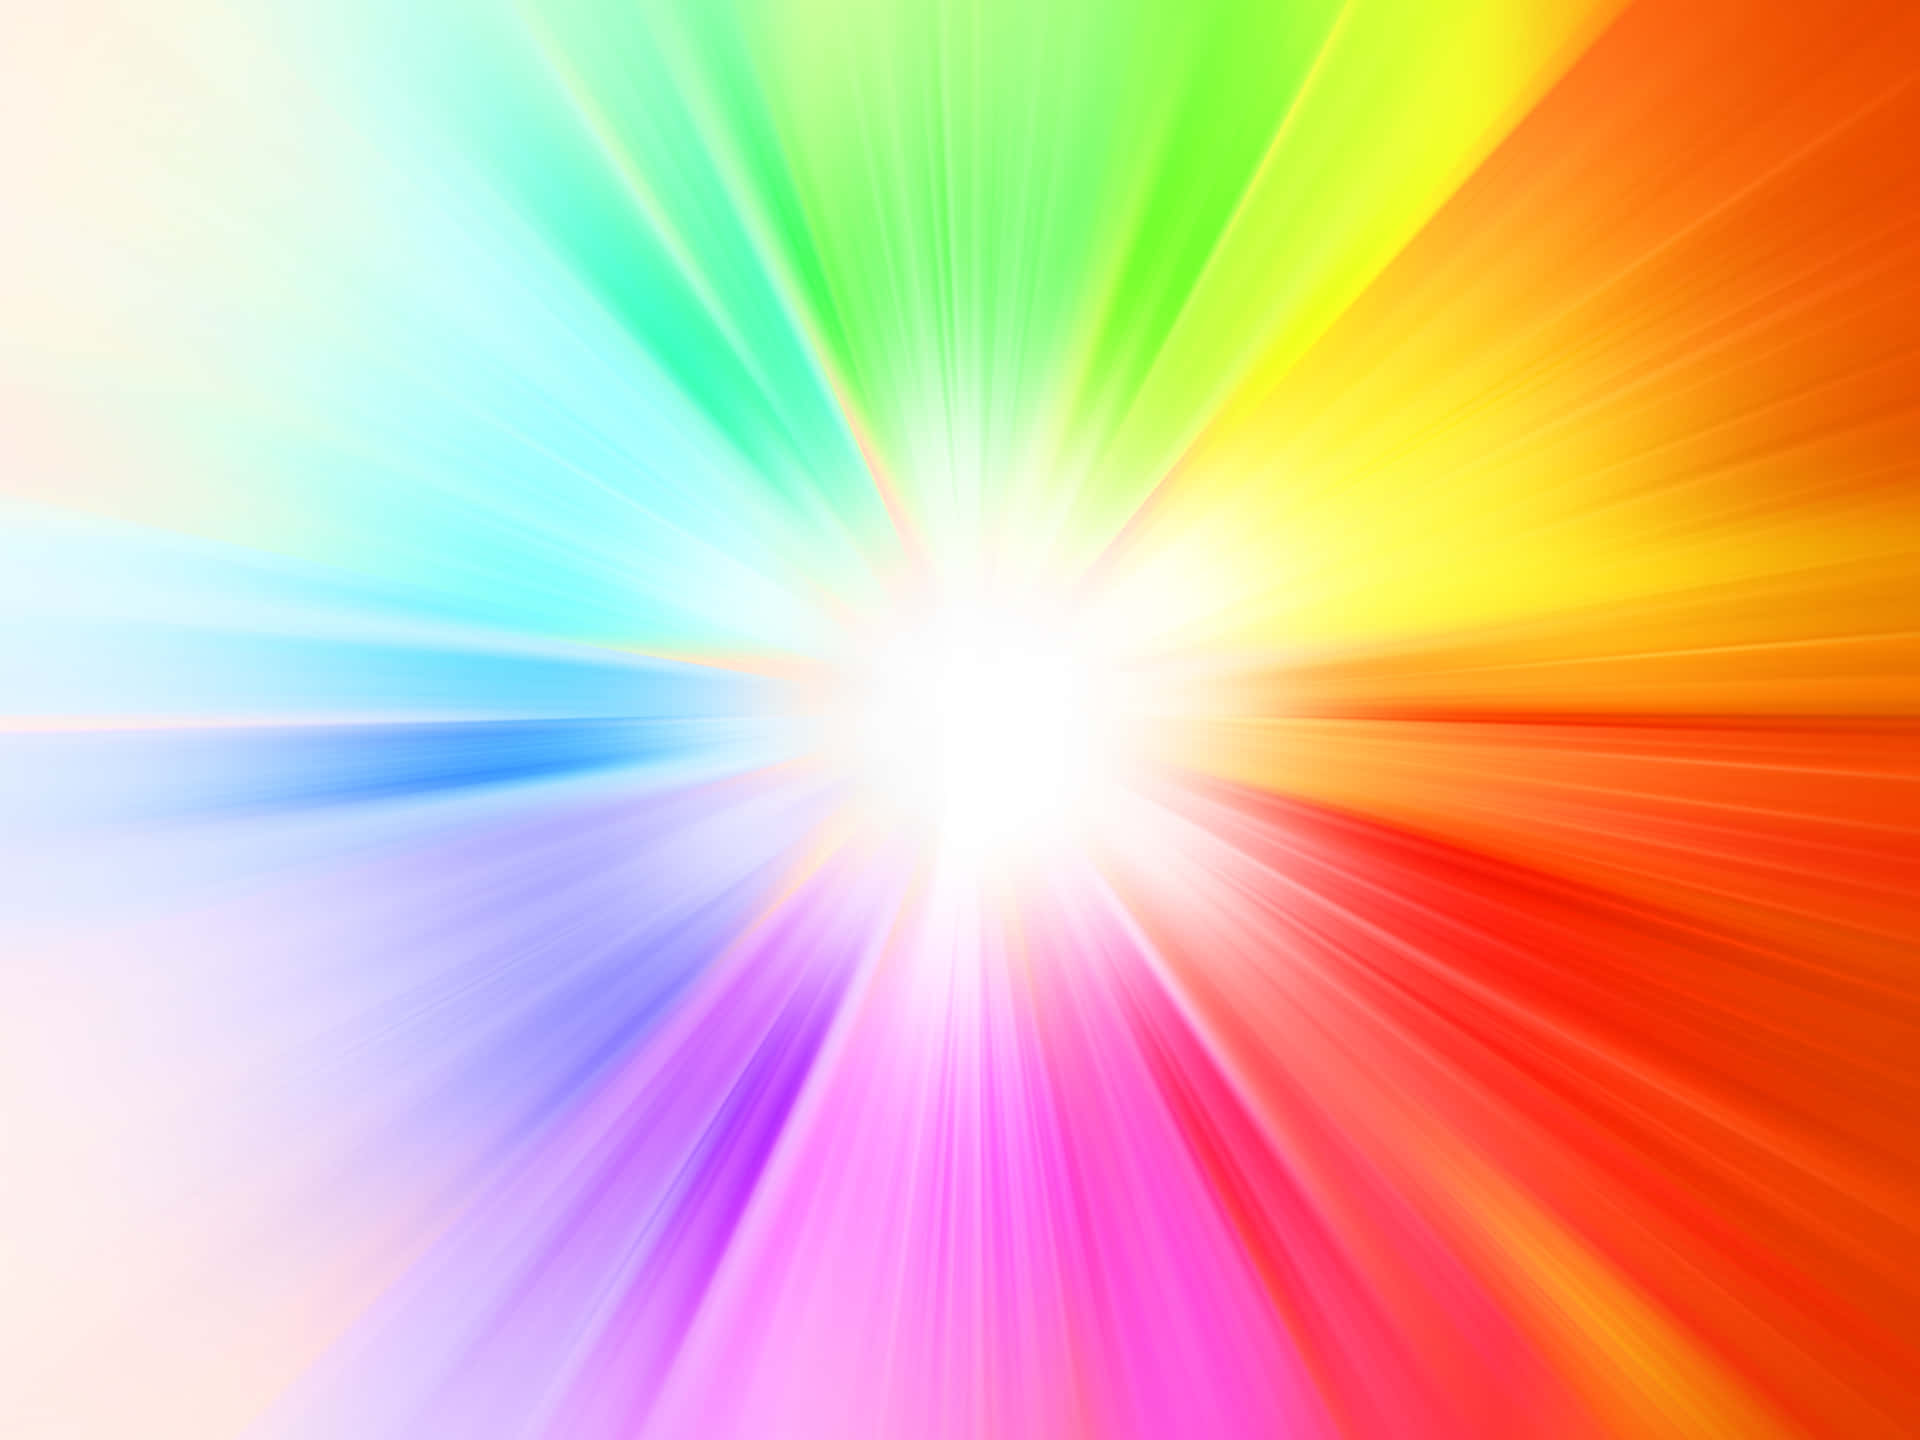 "Brighten your day with this flashy background"